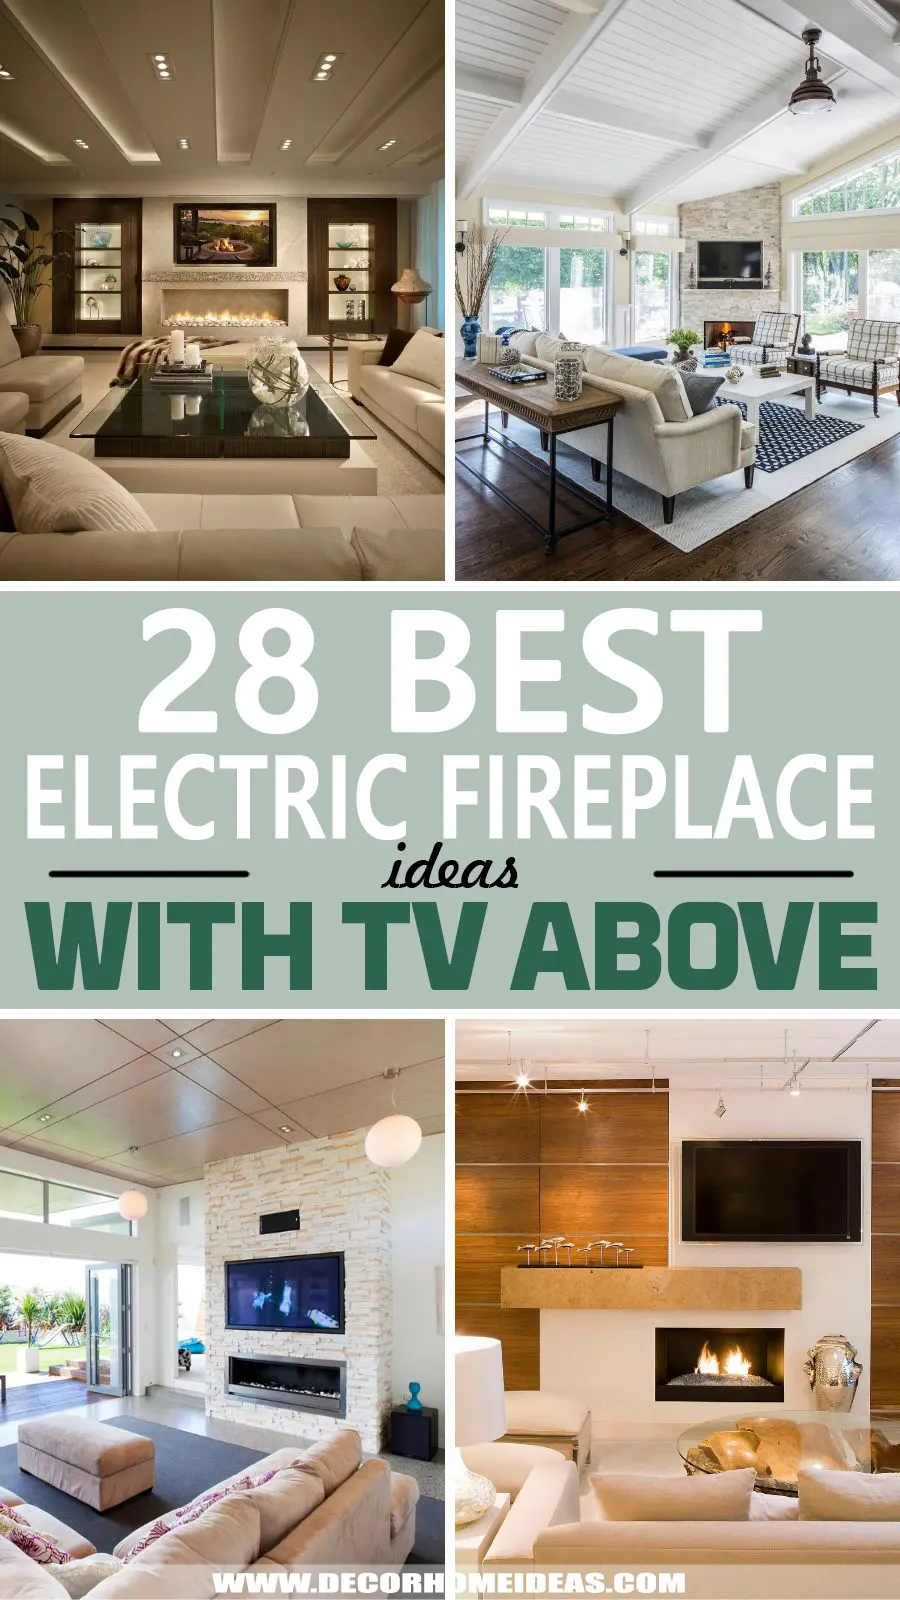 Best Electric Fireplace Ideas With TV Above. Placing a TV above an electric fireplace is a great idea for your living room as long as you know the safety rules and how to properly use the fireplace.